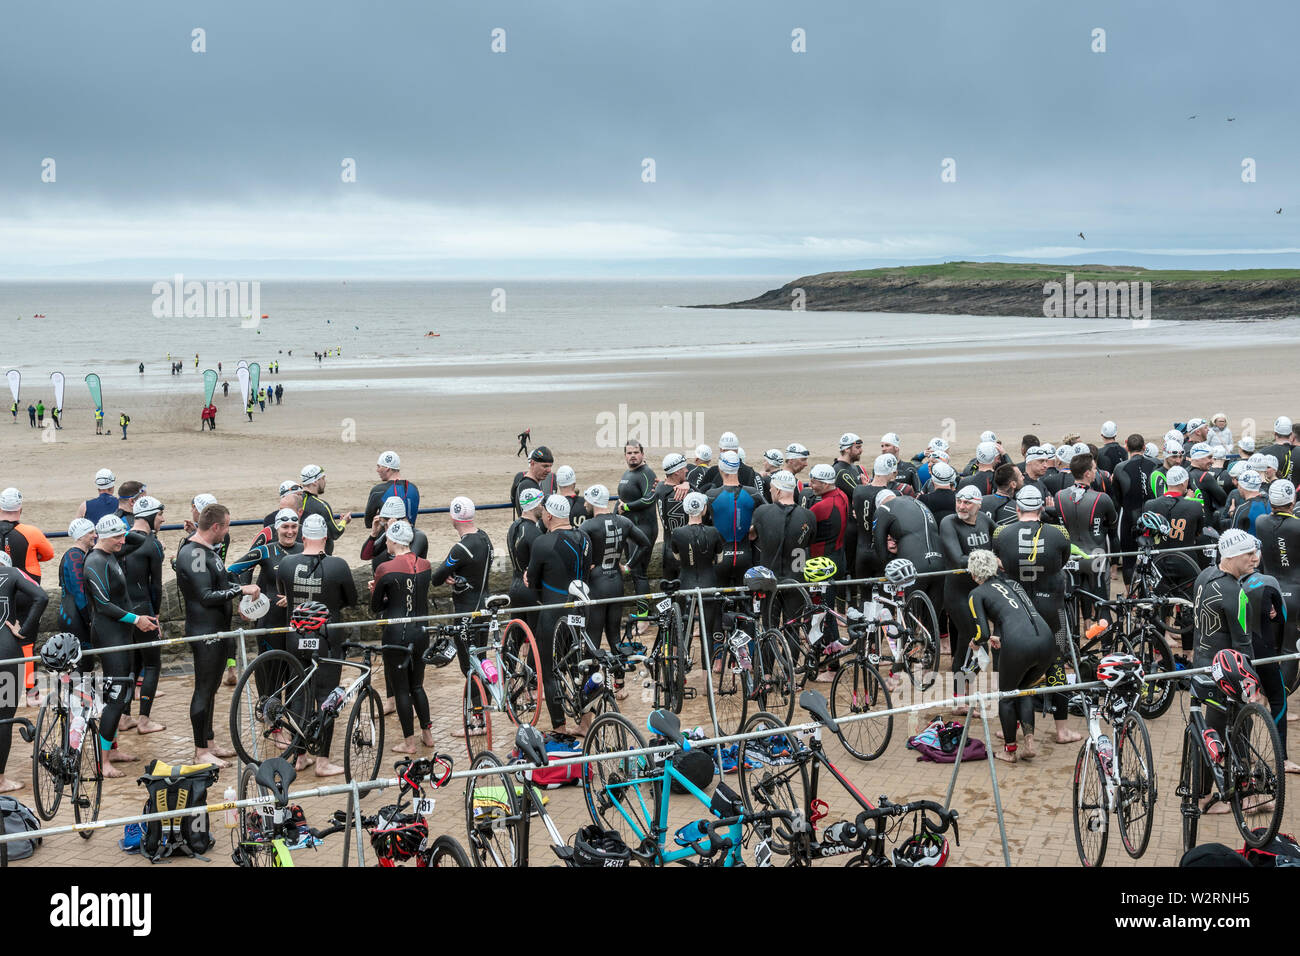 Beneath dark clouds competitors in the 2019 Barry Island sprint triathlon wait on the promenade beside the beach to start their race. Stock Photo